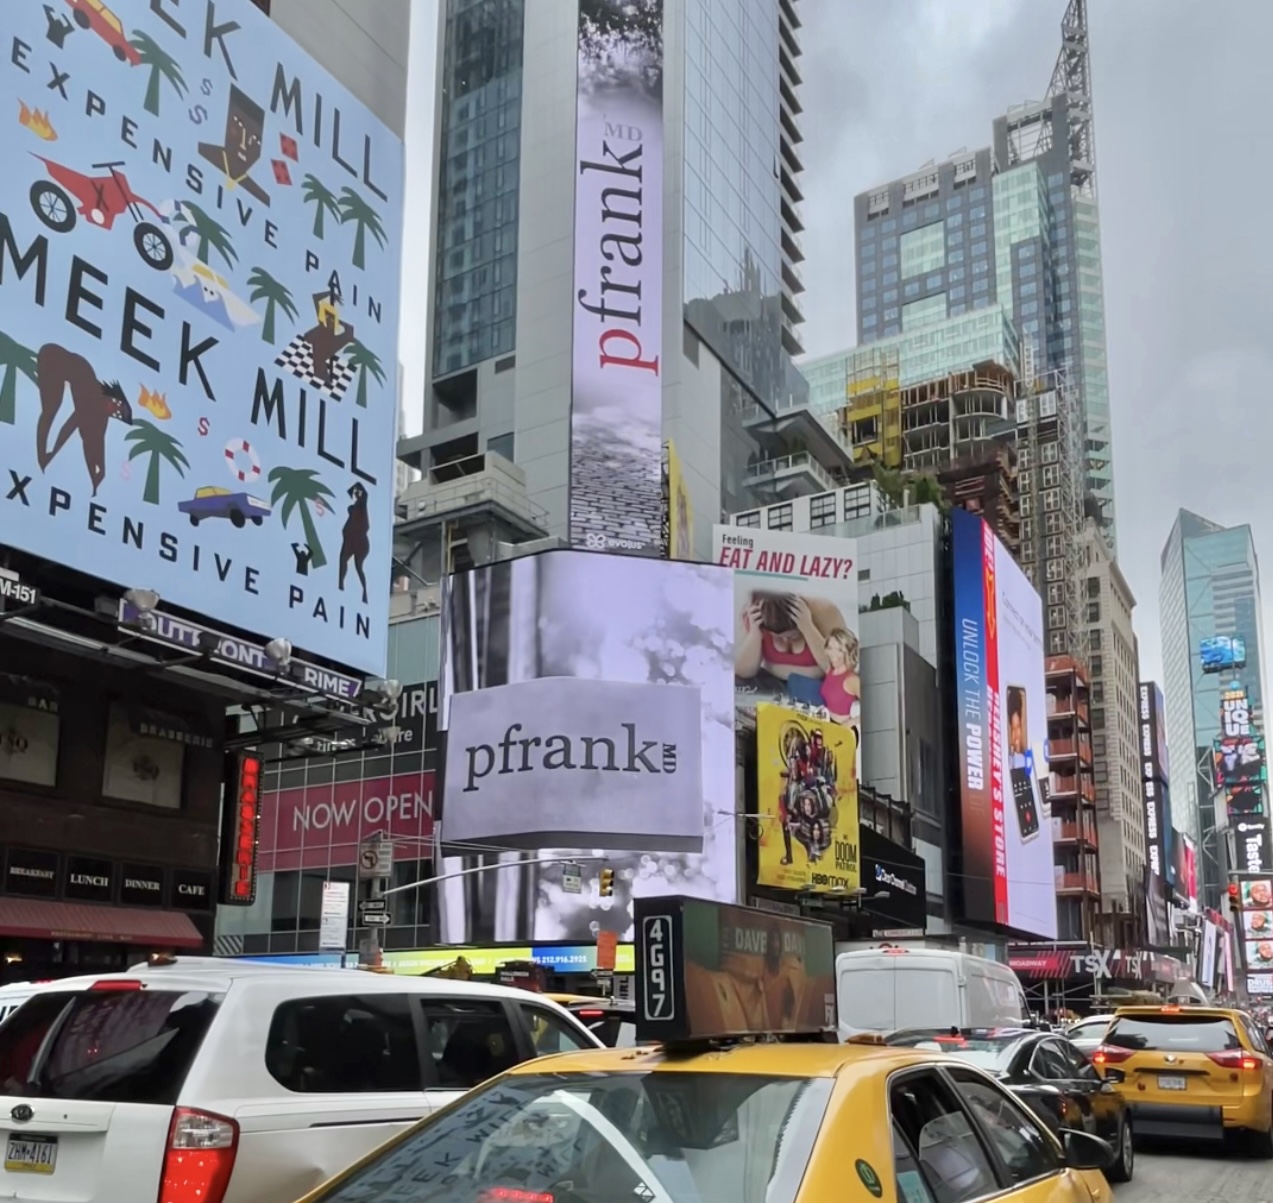 PFrankMD Billboards in Times Square New York